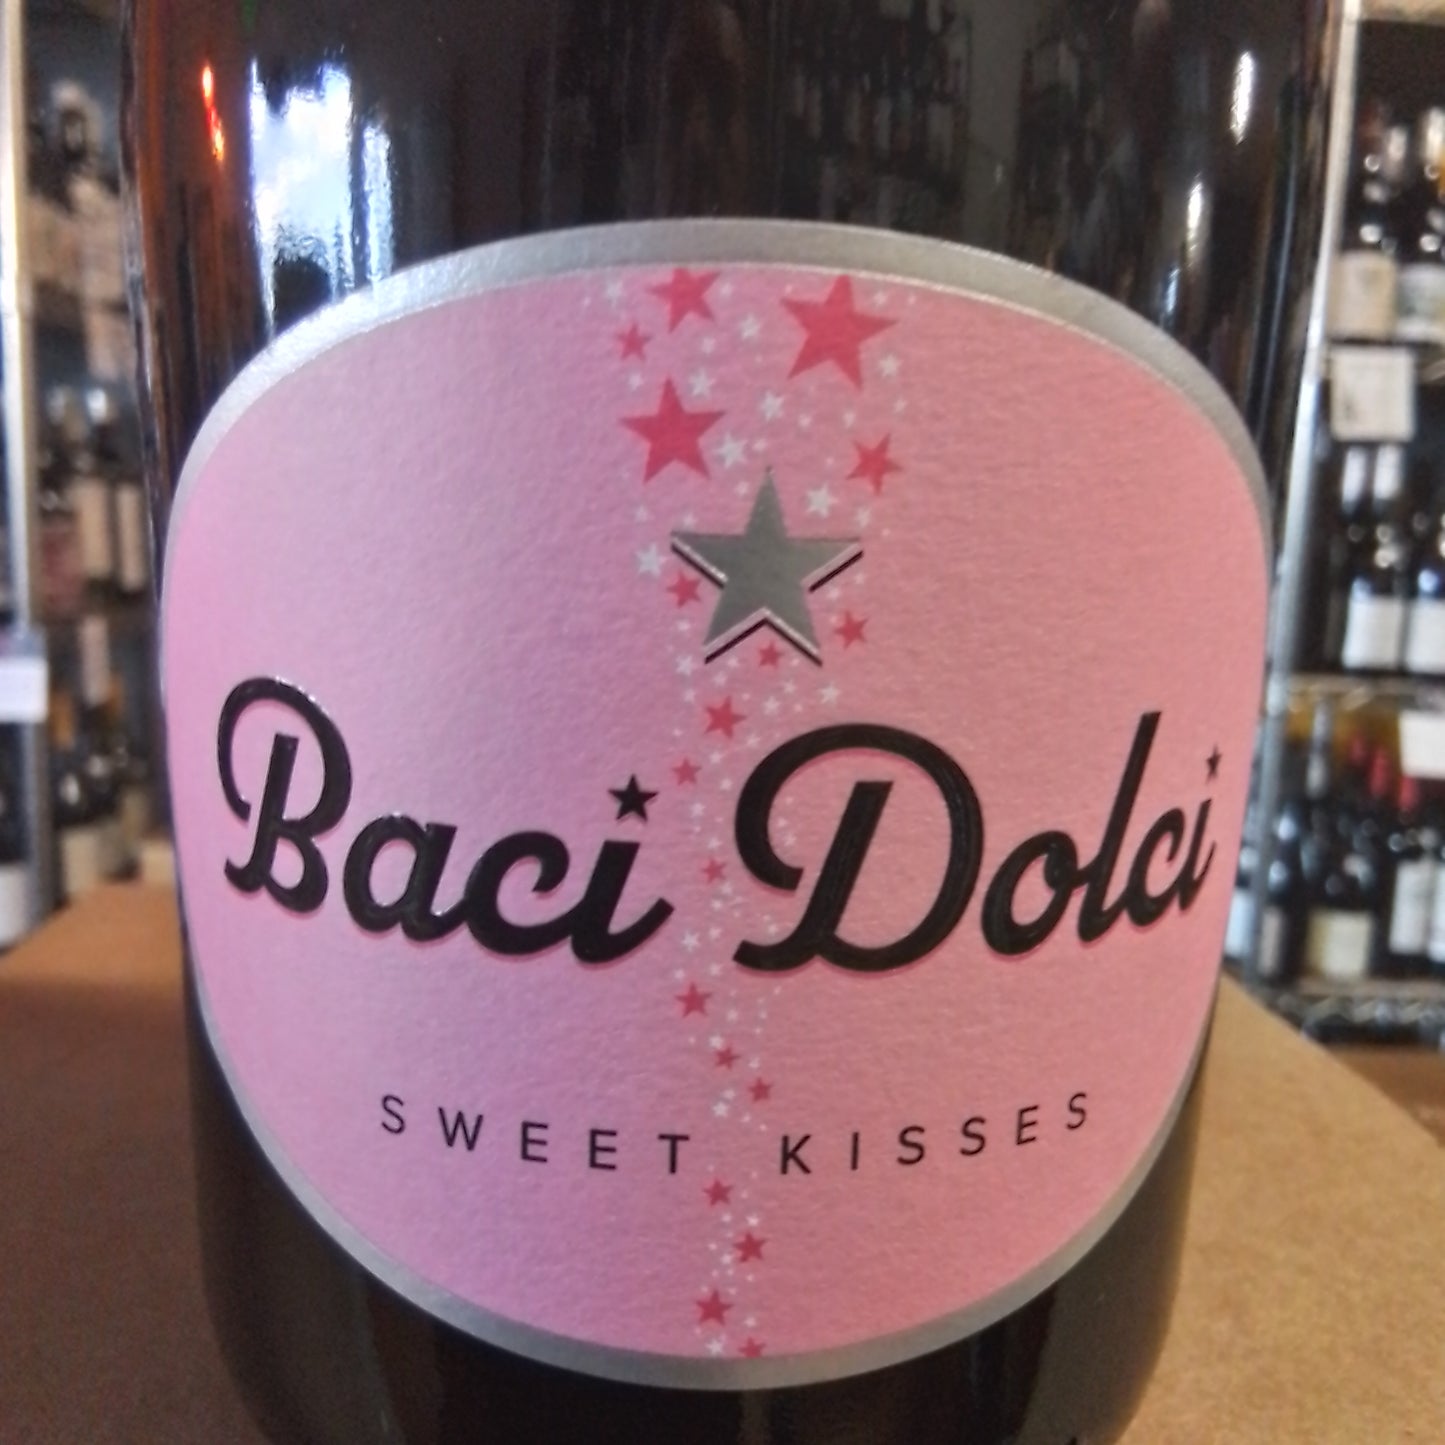 BACI DOLCI NV Rosso Red Wine 'Sweet Kiss' (Italy)